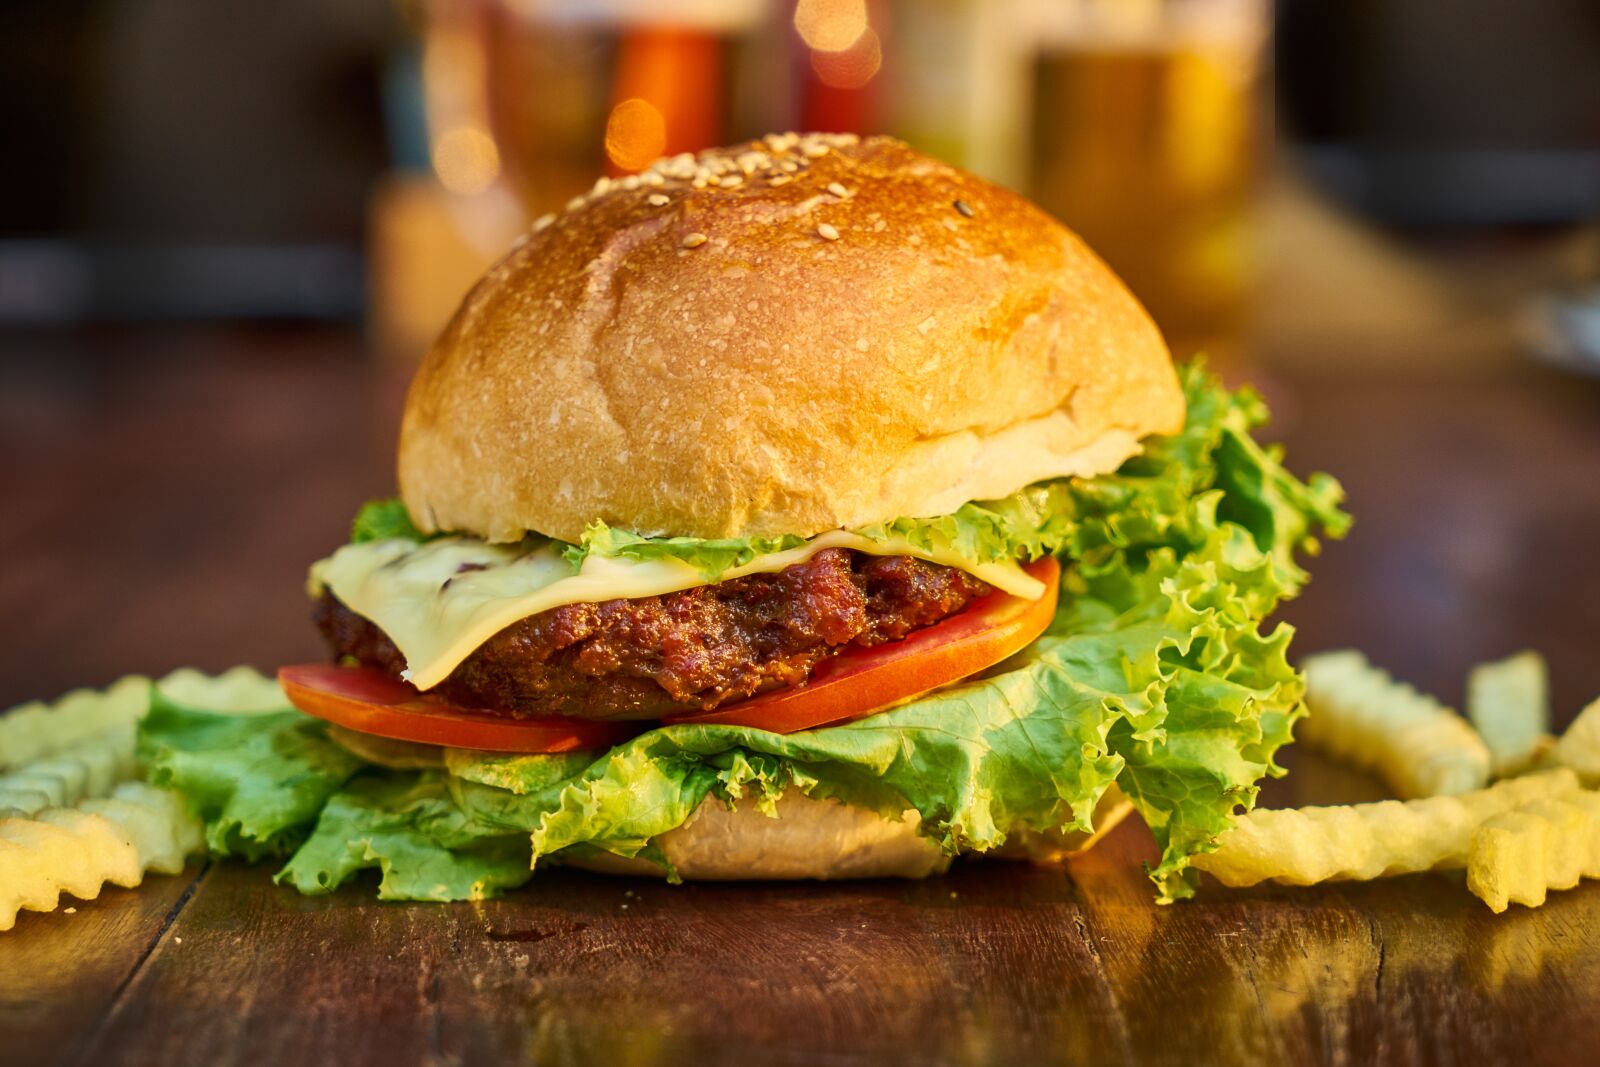 Sony a7R II sample photo. Burger, meat, bread photography